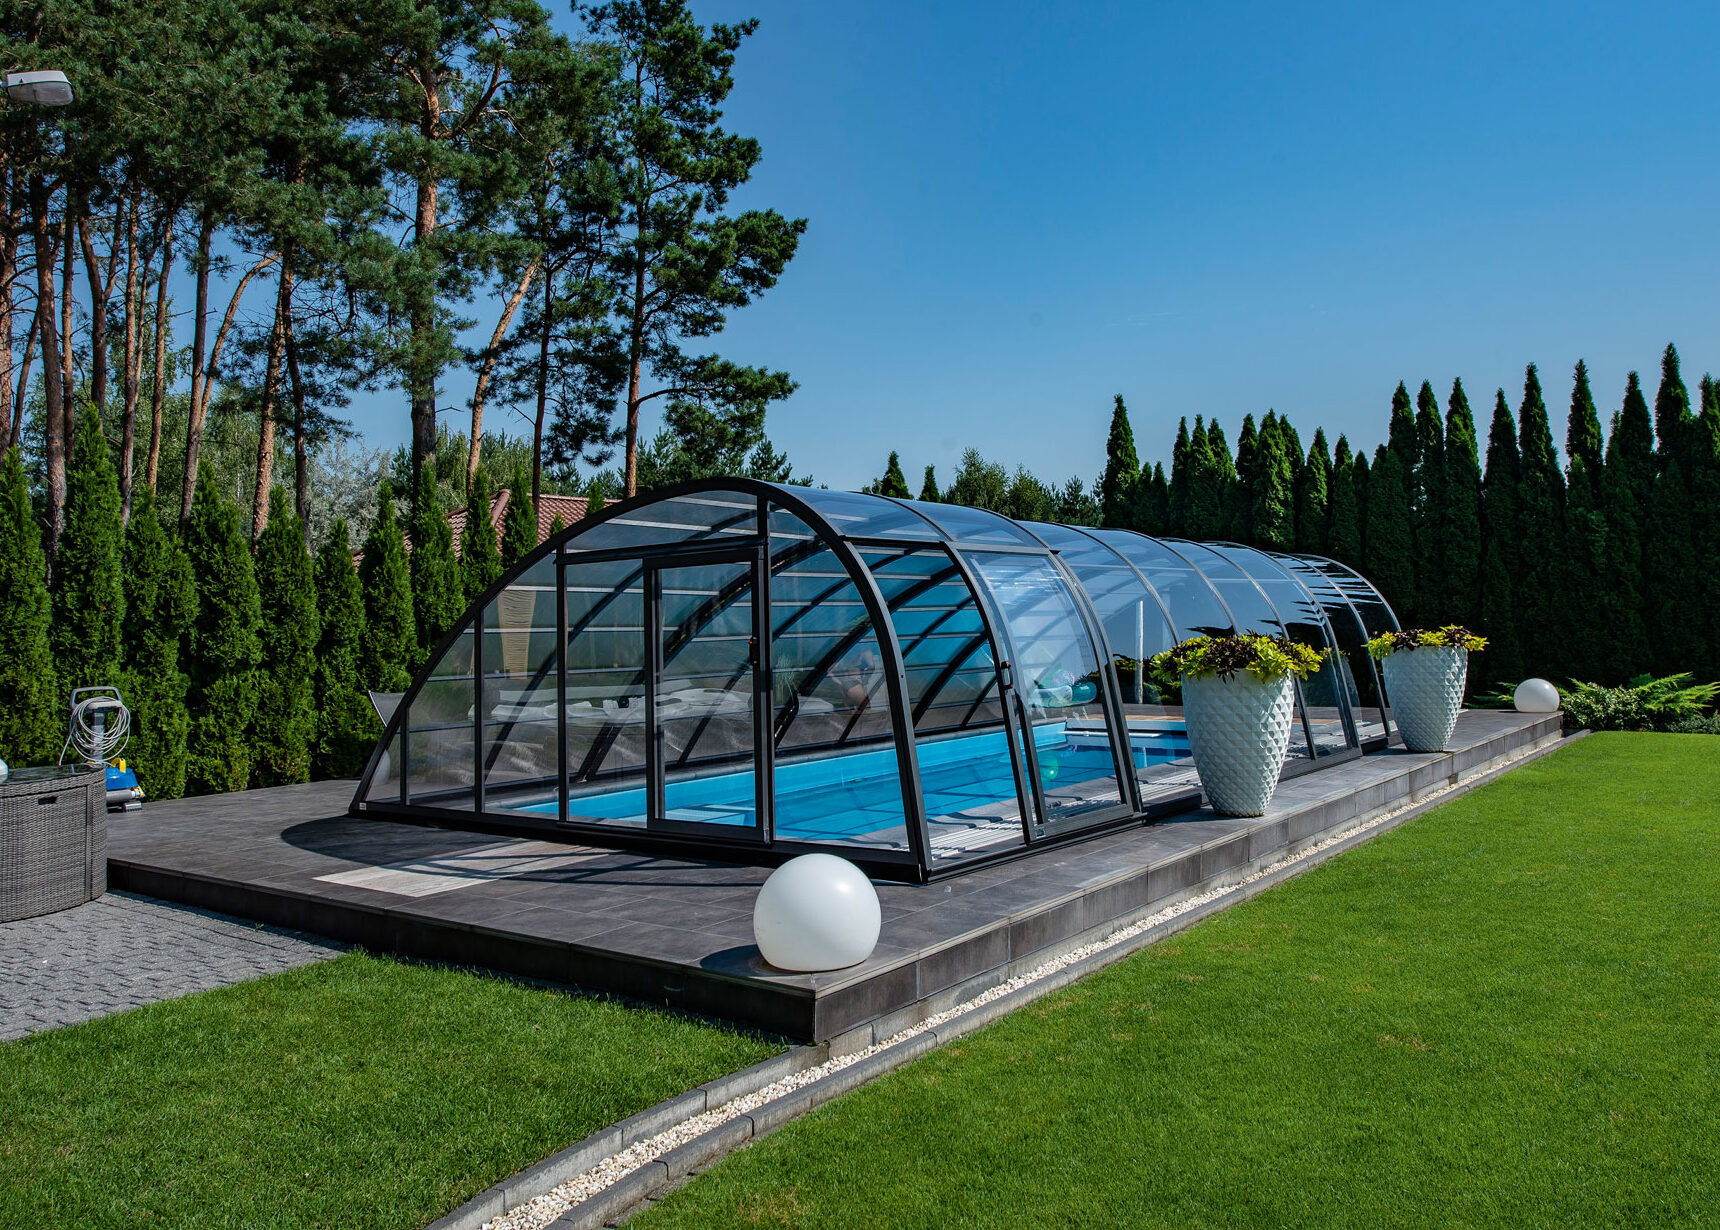 This retractable polycarbonate model by Starlight Pools